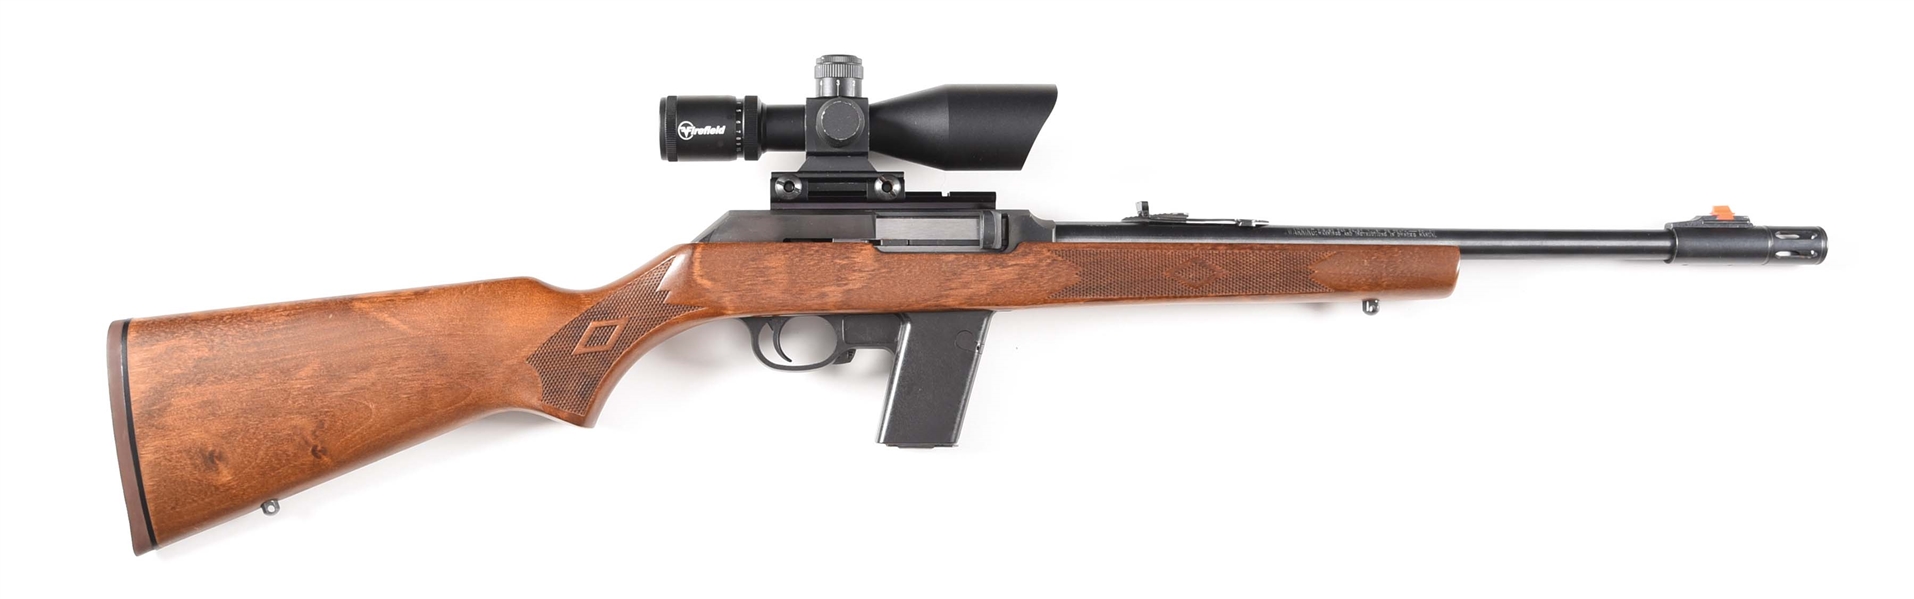 (M) MARLIN 9MM CAMP CARBINE SEMI AUTOMATIC RIFLE WITH SCOPE.